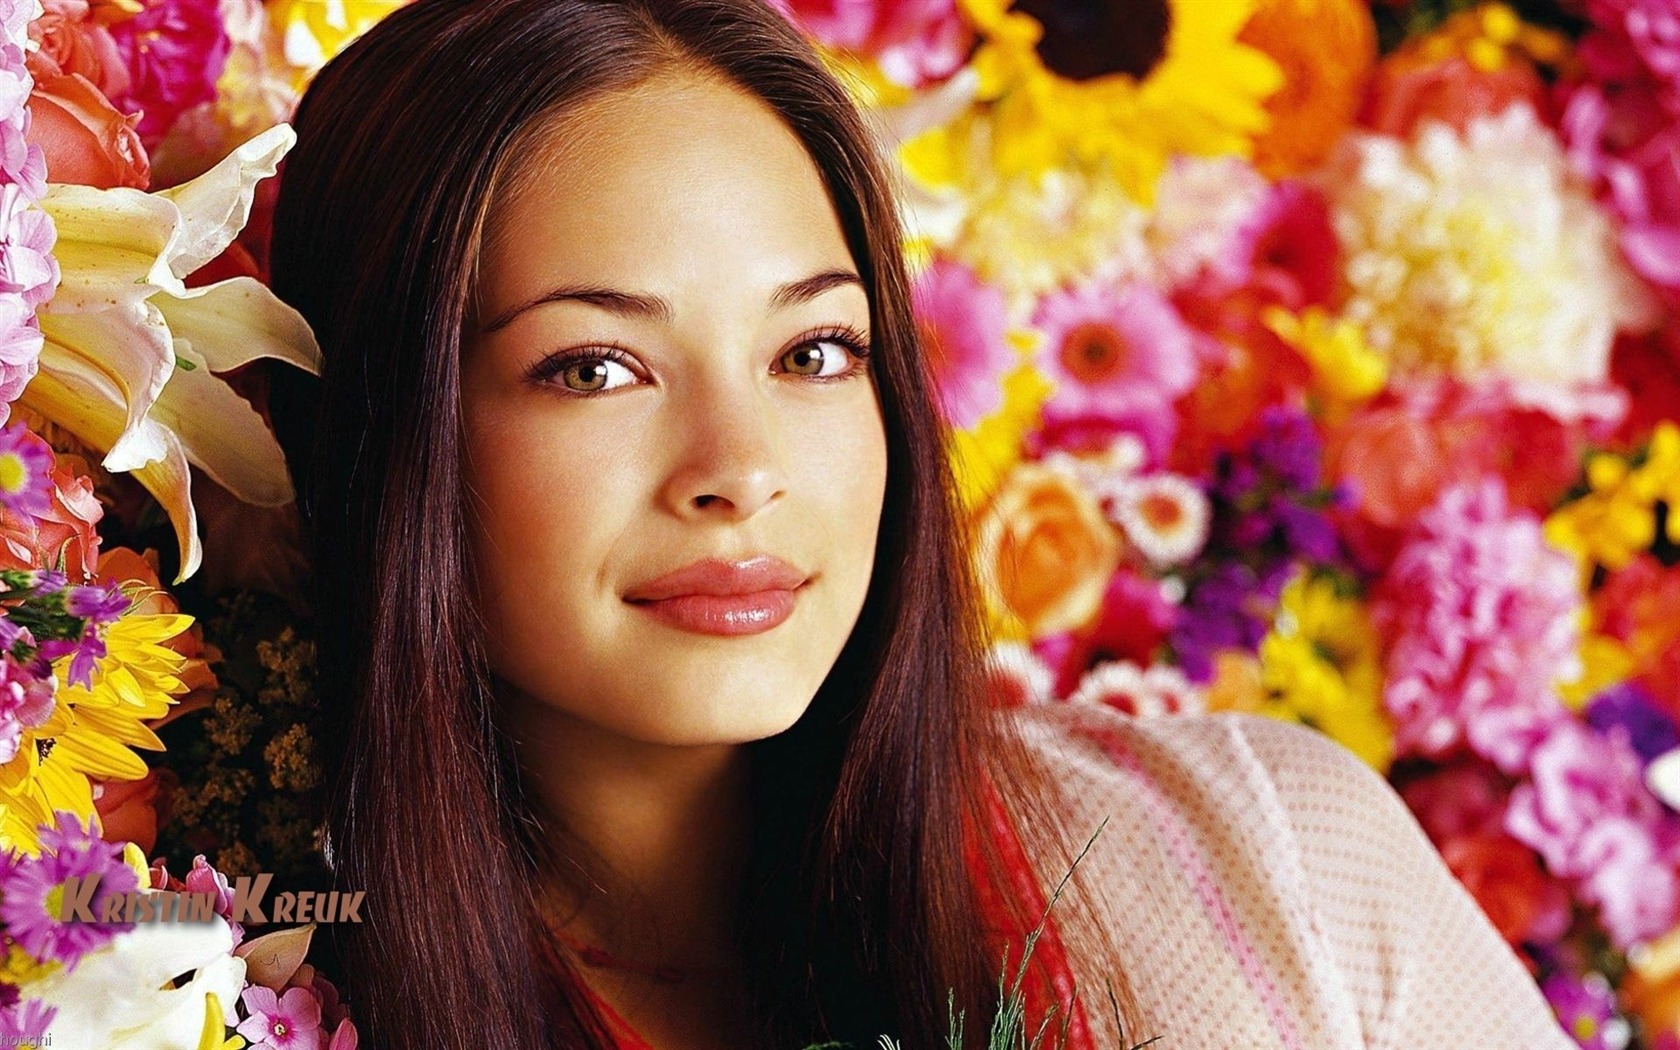 Kristin Kreuk #006 - 1680x1050 Wallpapers Pictures Photos Images